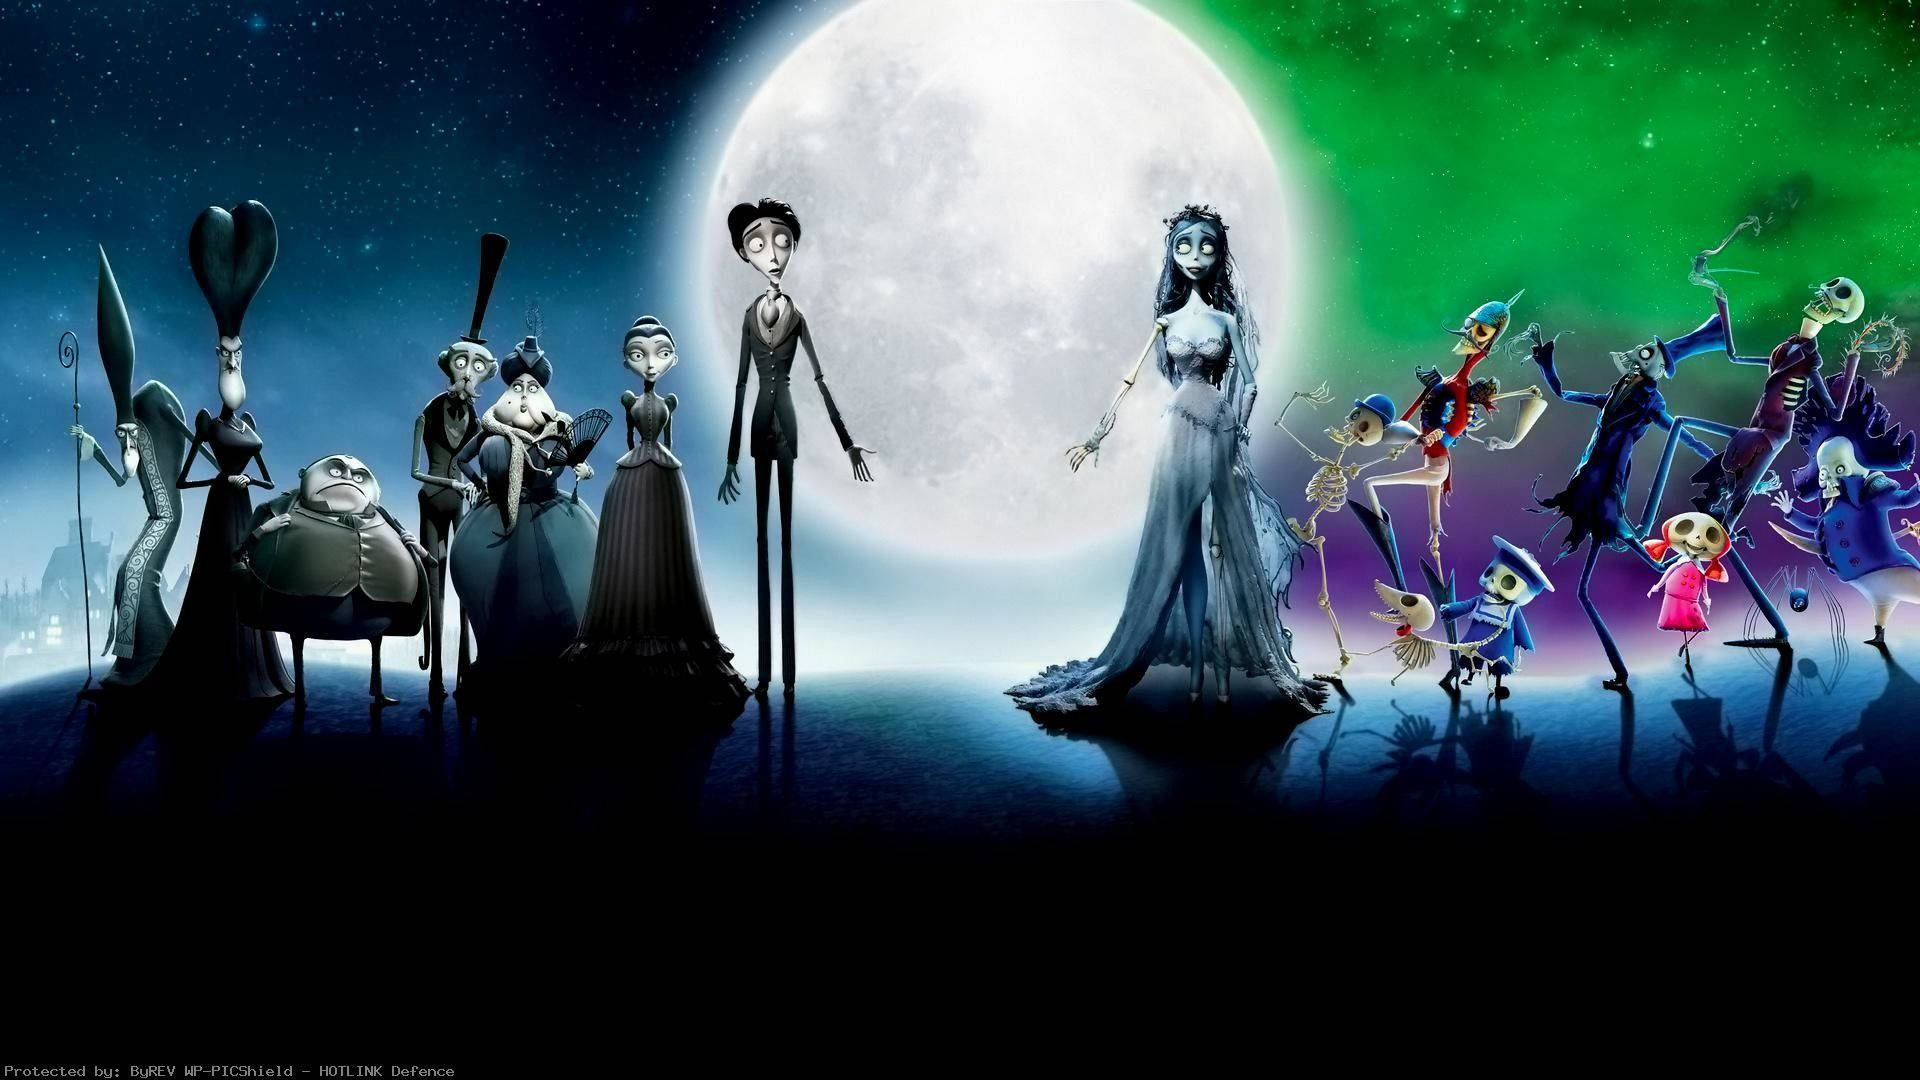 Two lovebirds of Halloween — Jack Skellington and Emily from The Nightmare Before Christmas and Corpse Bride Wallpaper